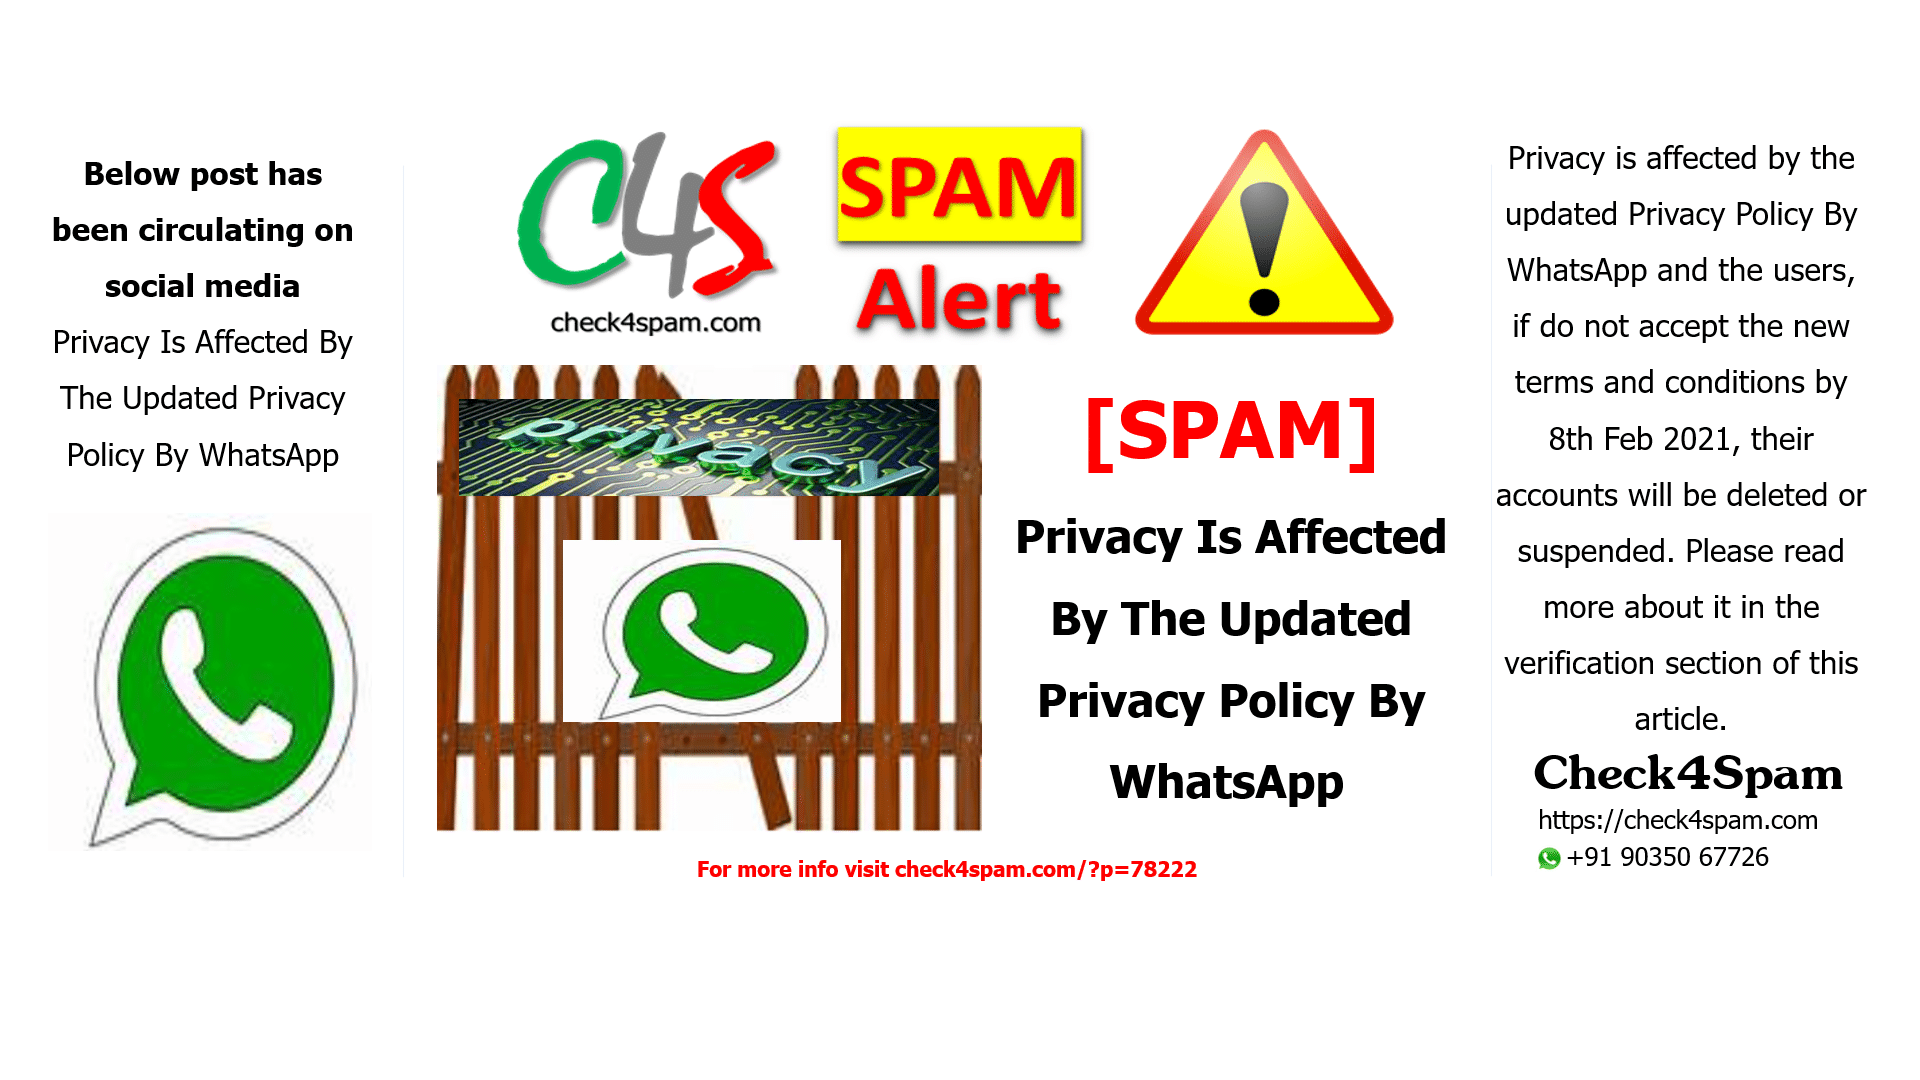 Privacy Is Affected By The Updated Privacy Policy By WhatsApp